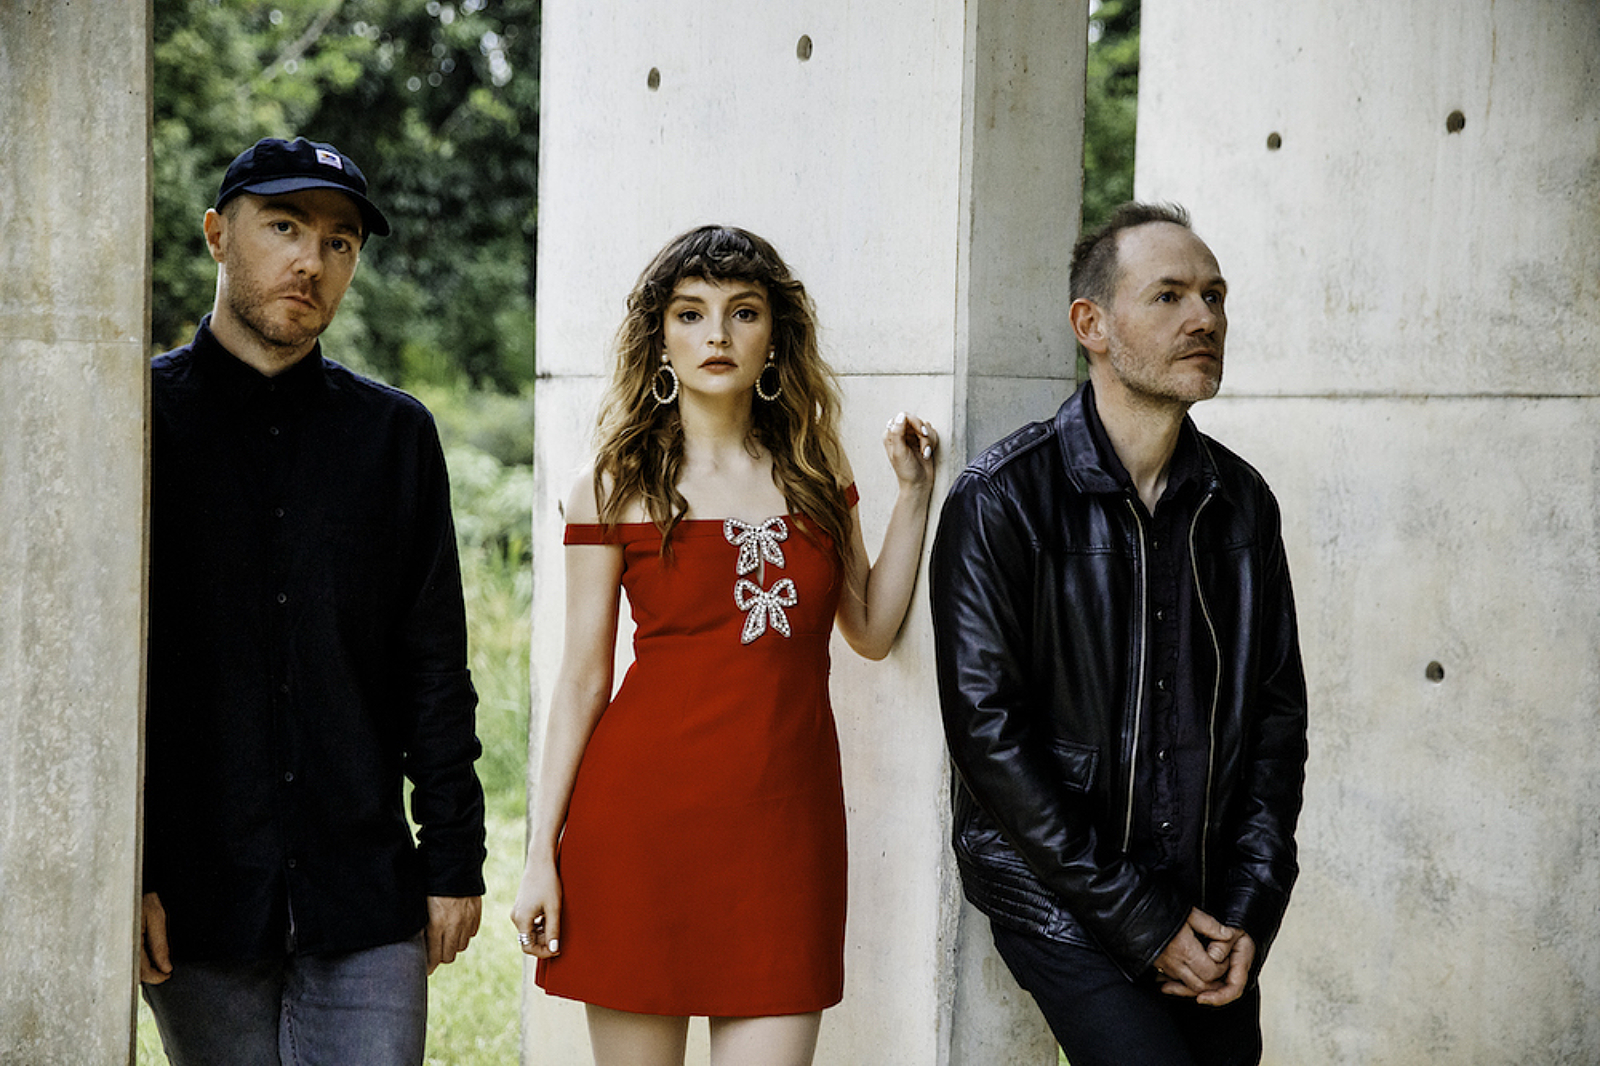 CHVRCHES release new single 'Over'